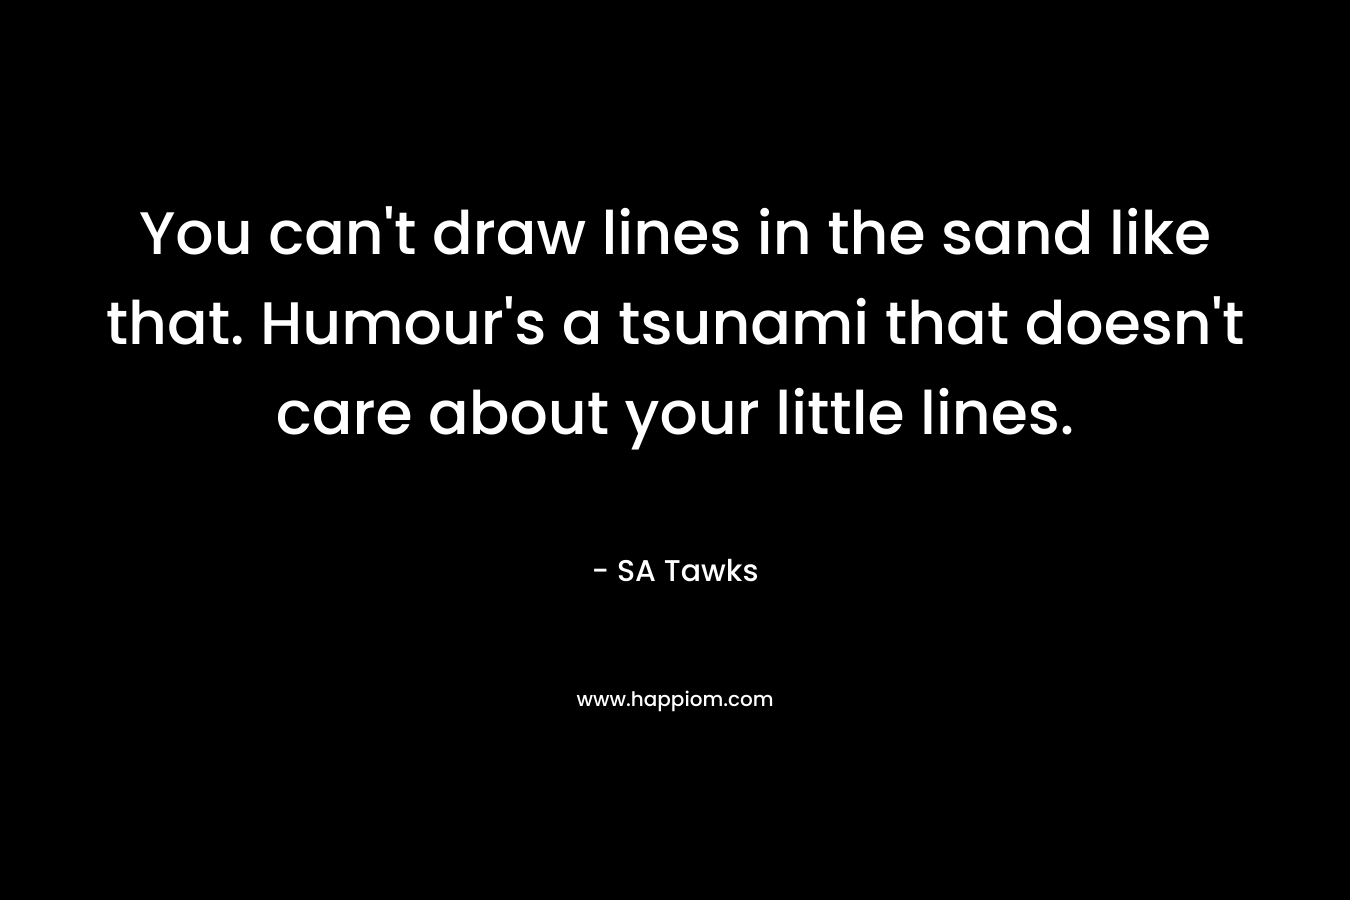 You can’t draw lines in the sand like that. Humour’s a tsunami that doesn’t care about your little lines. – SA Tawks